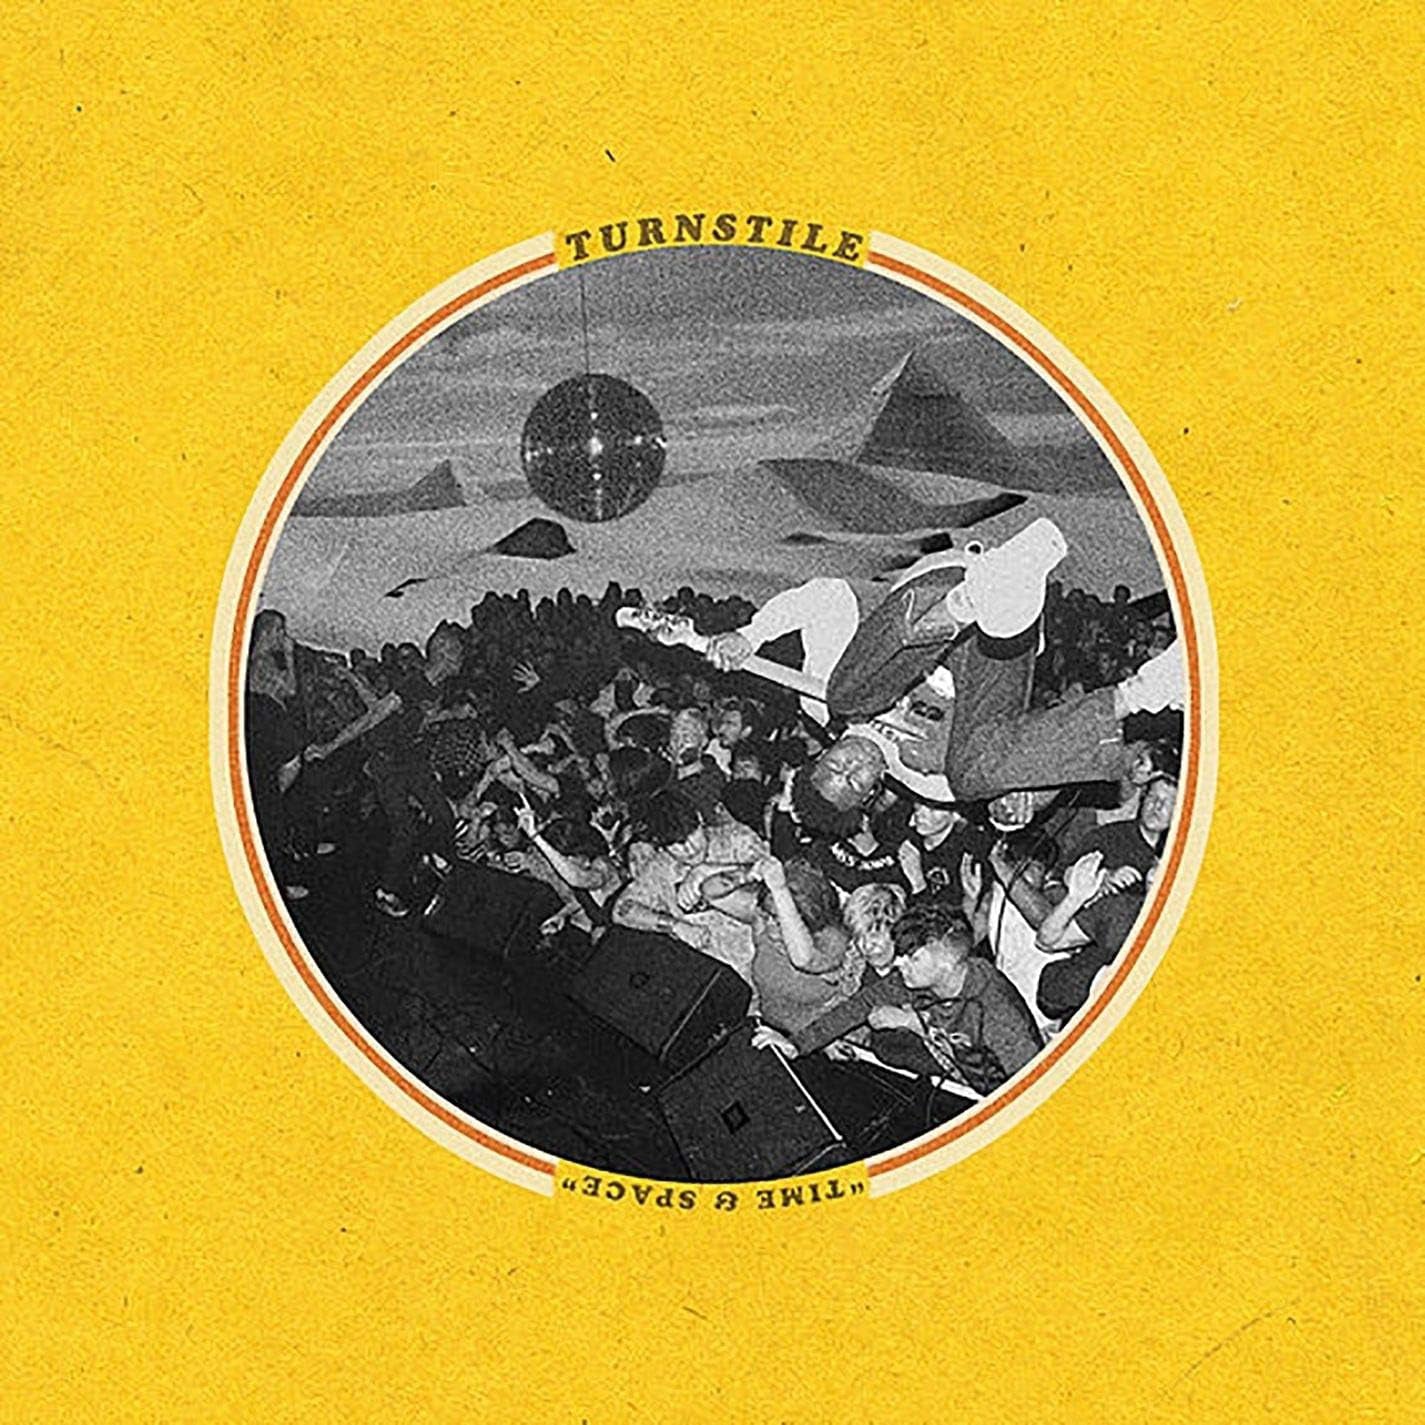 TURNSTILE 'TIME & SPACE'